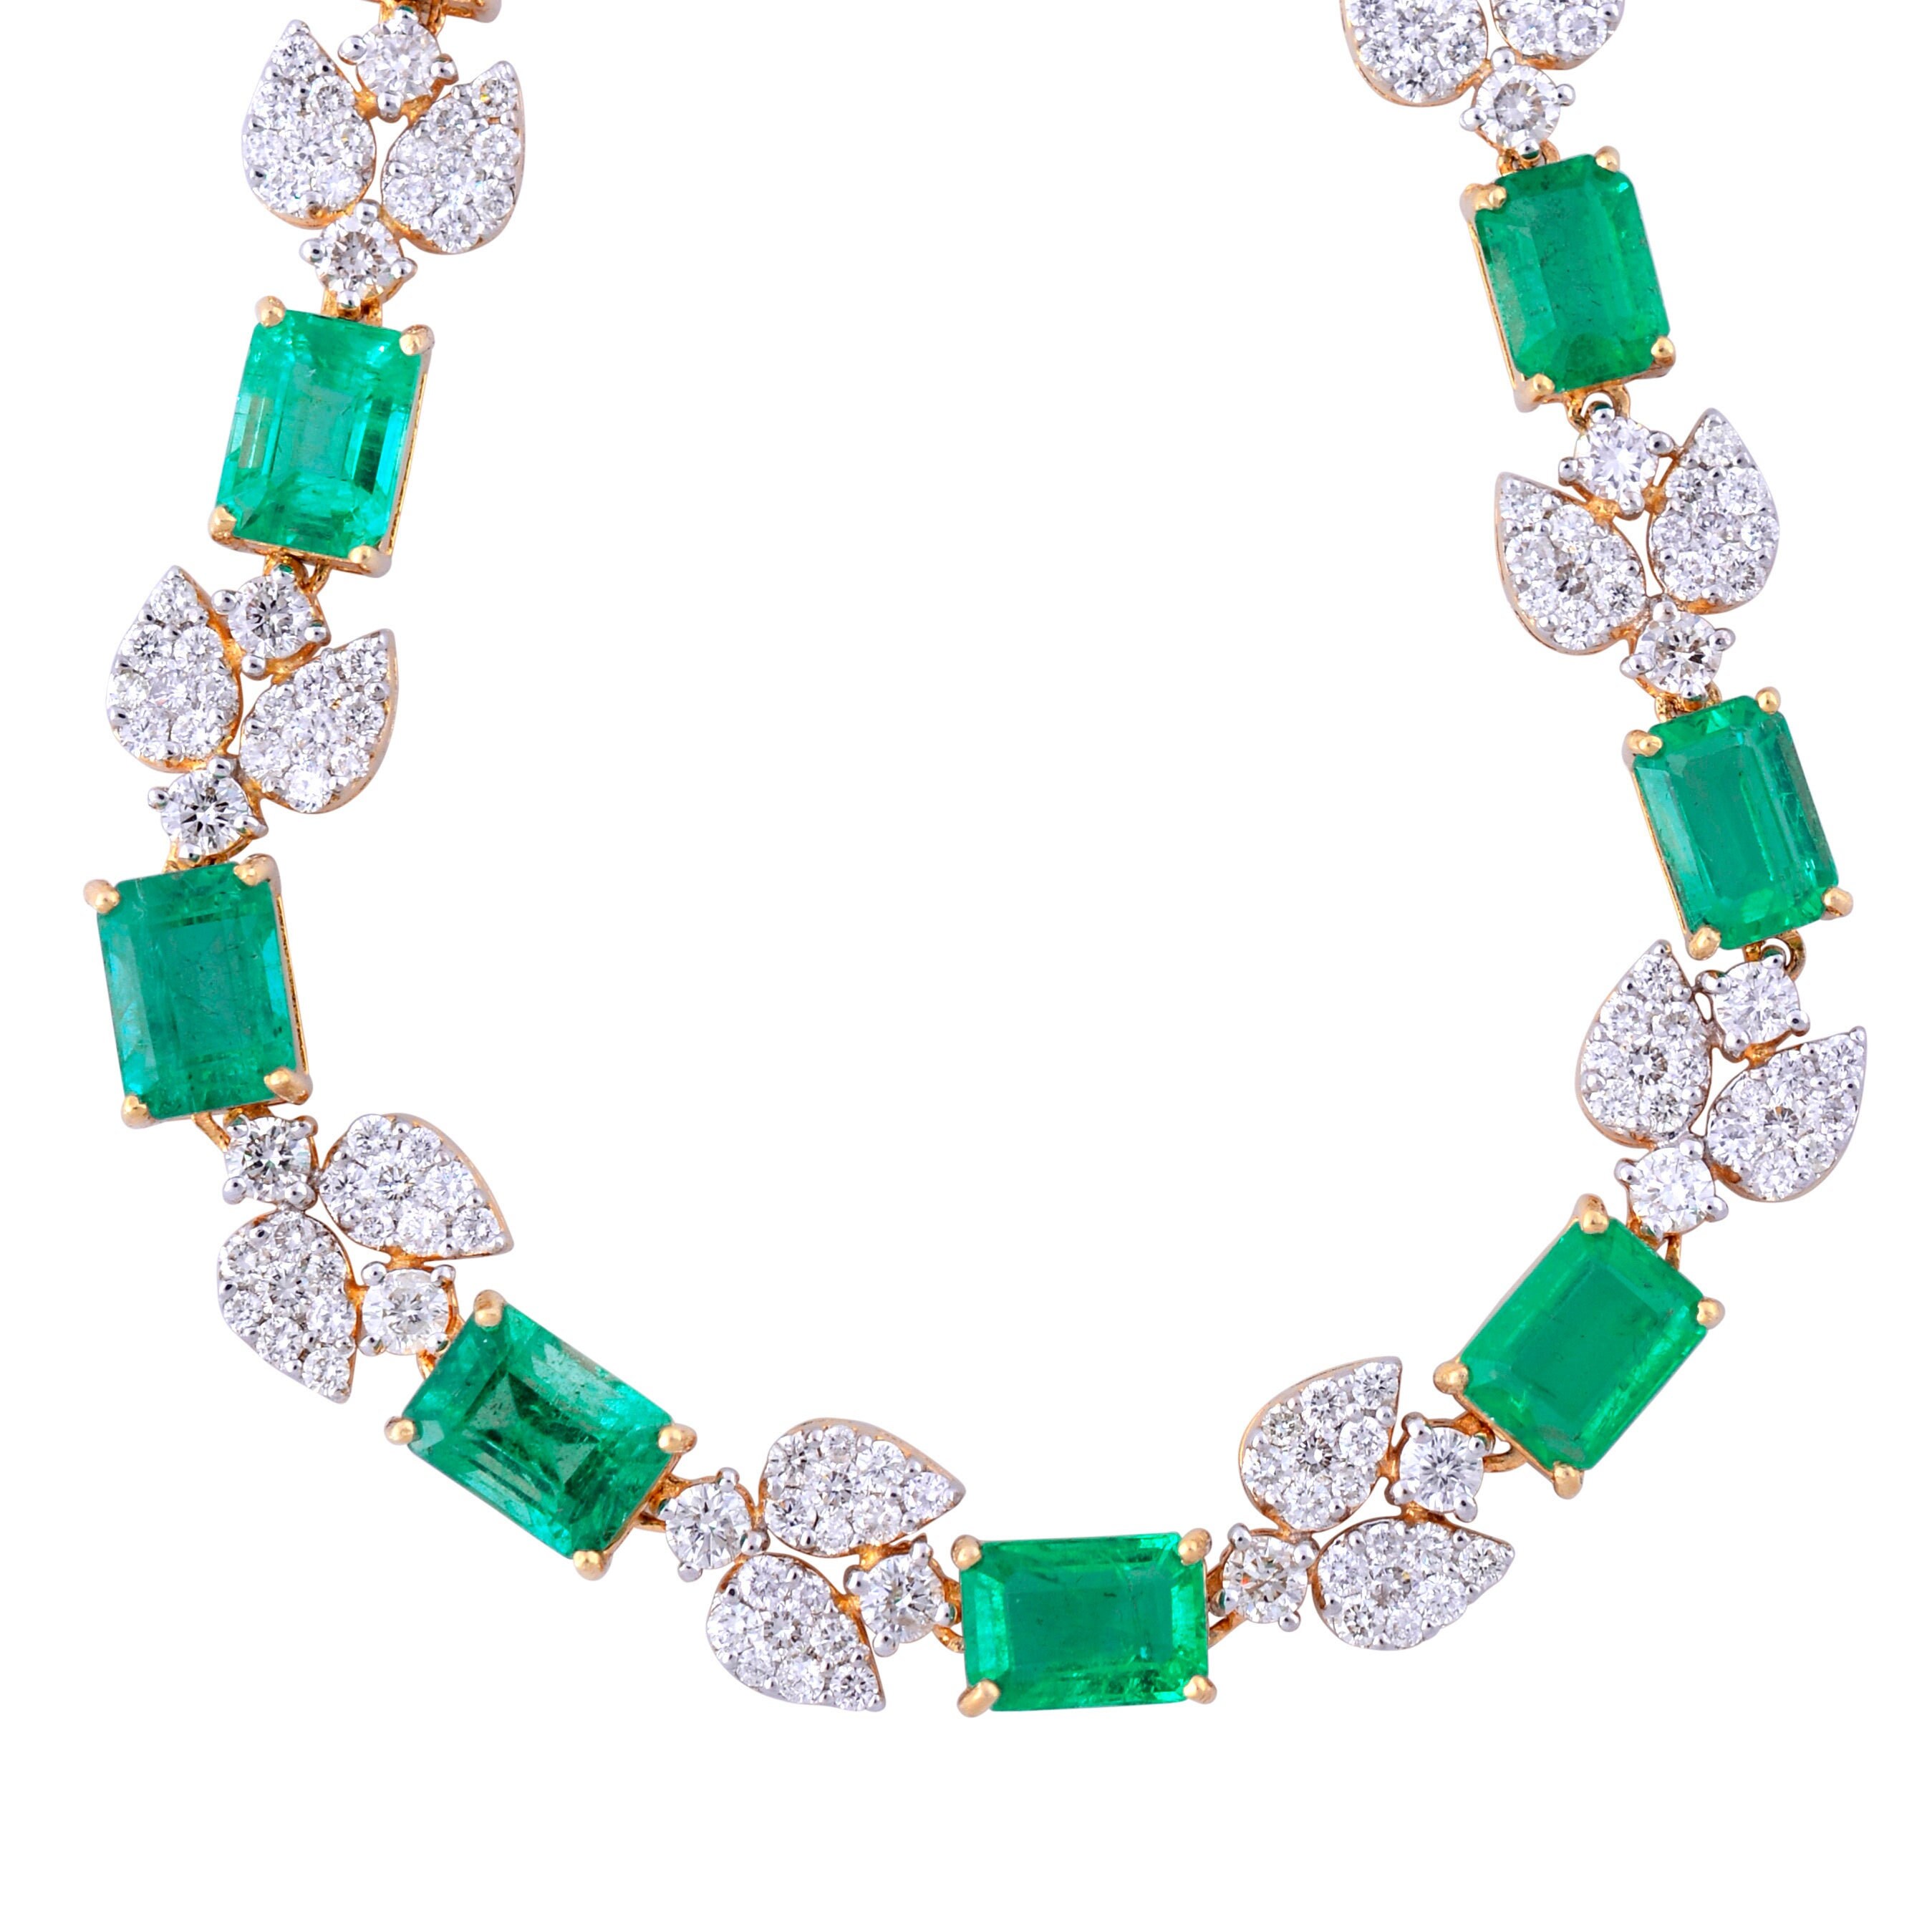 On Sale 50 Cts Natural Emerald & Diamond Necklace 14K White Gold 32 Inch Long Si Clarity Hi Color Diamonds Handmade Jewelry